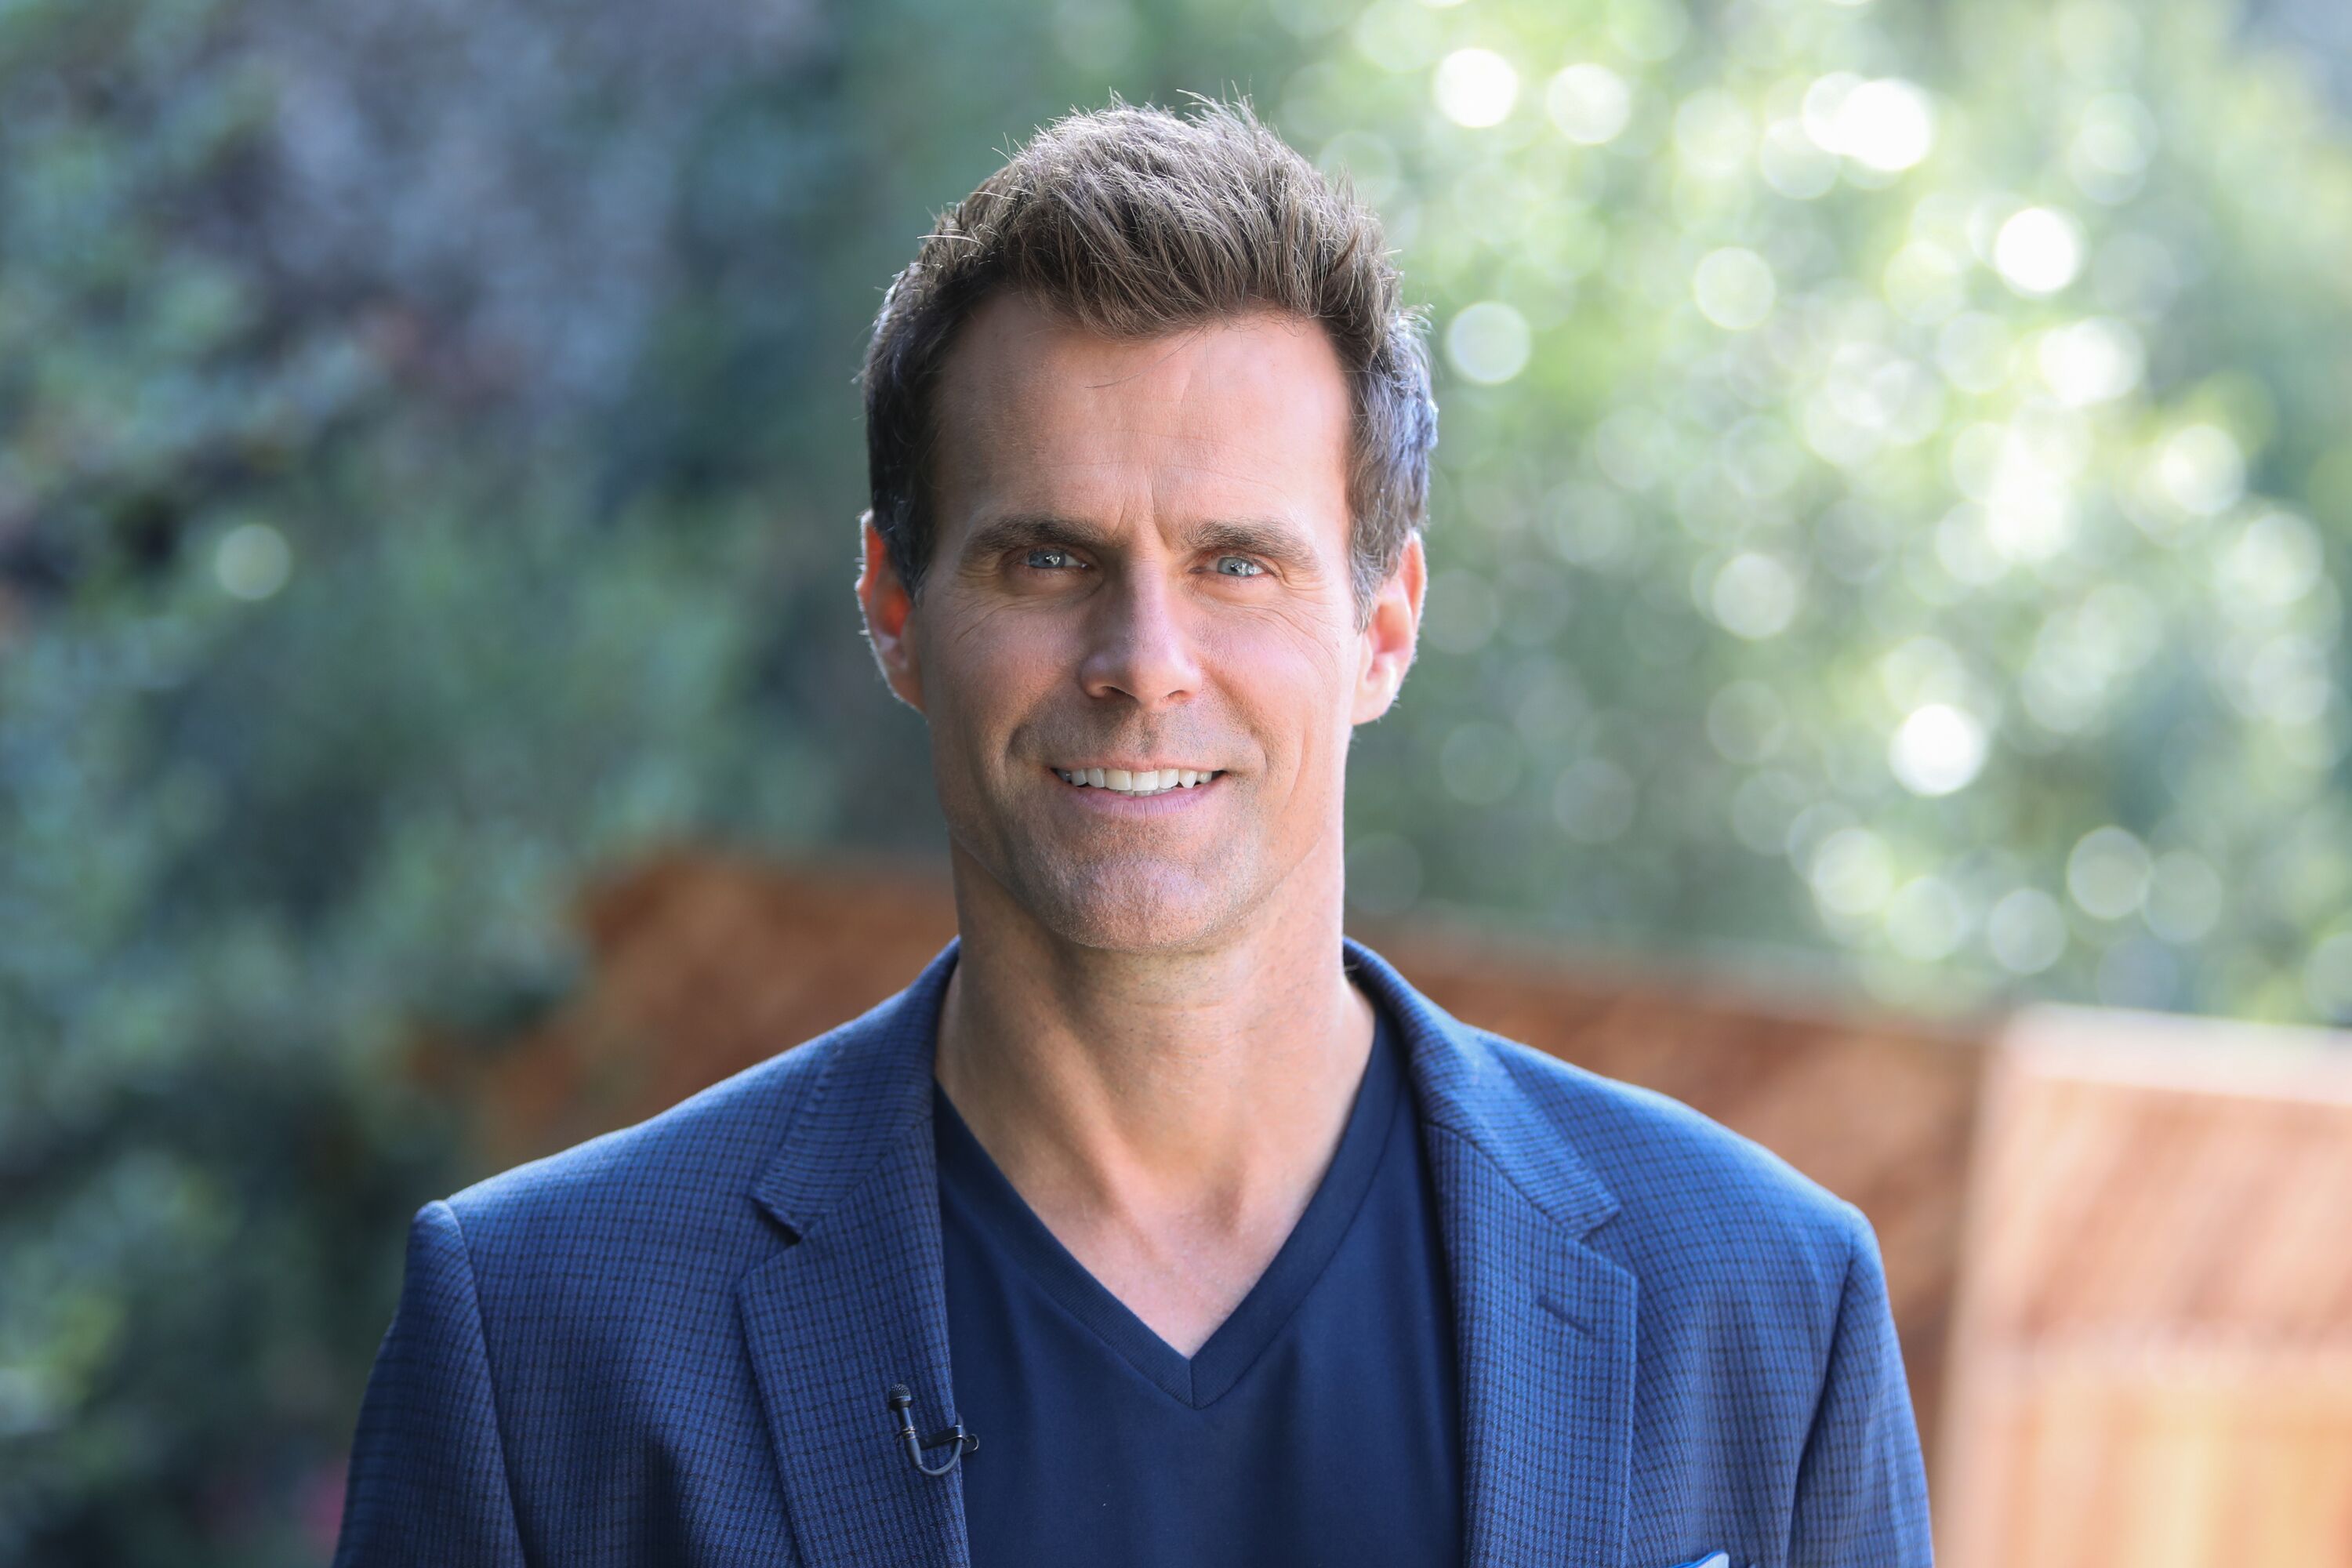 Actor / TV Host Cameron Mathison on the set of Hallmark's "Home & Family" at Universal Studios Hollywood on October 30, 2018 | Photo: Getty Images